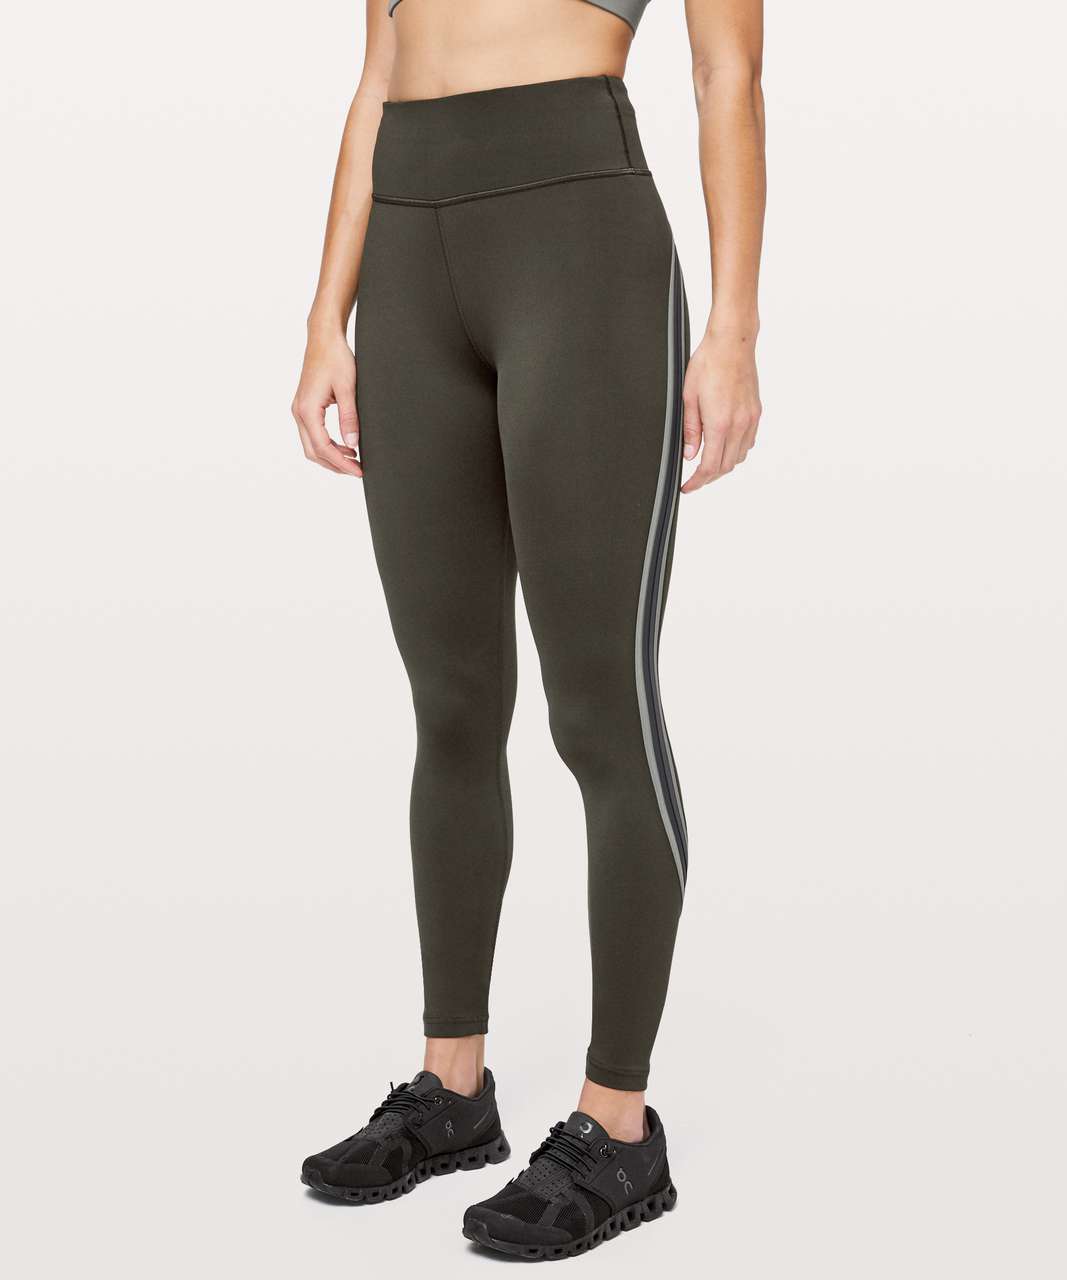 Lululemon Brown Crushed Velvet Wunder Lounge High Rise Tight 28 Pants -  Size 4 - $52 - From Nicole